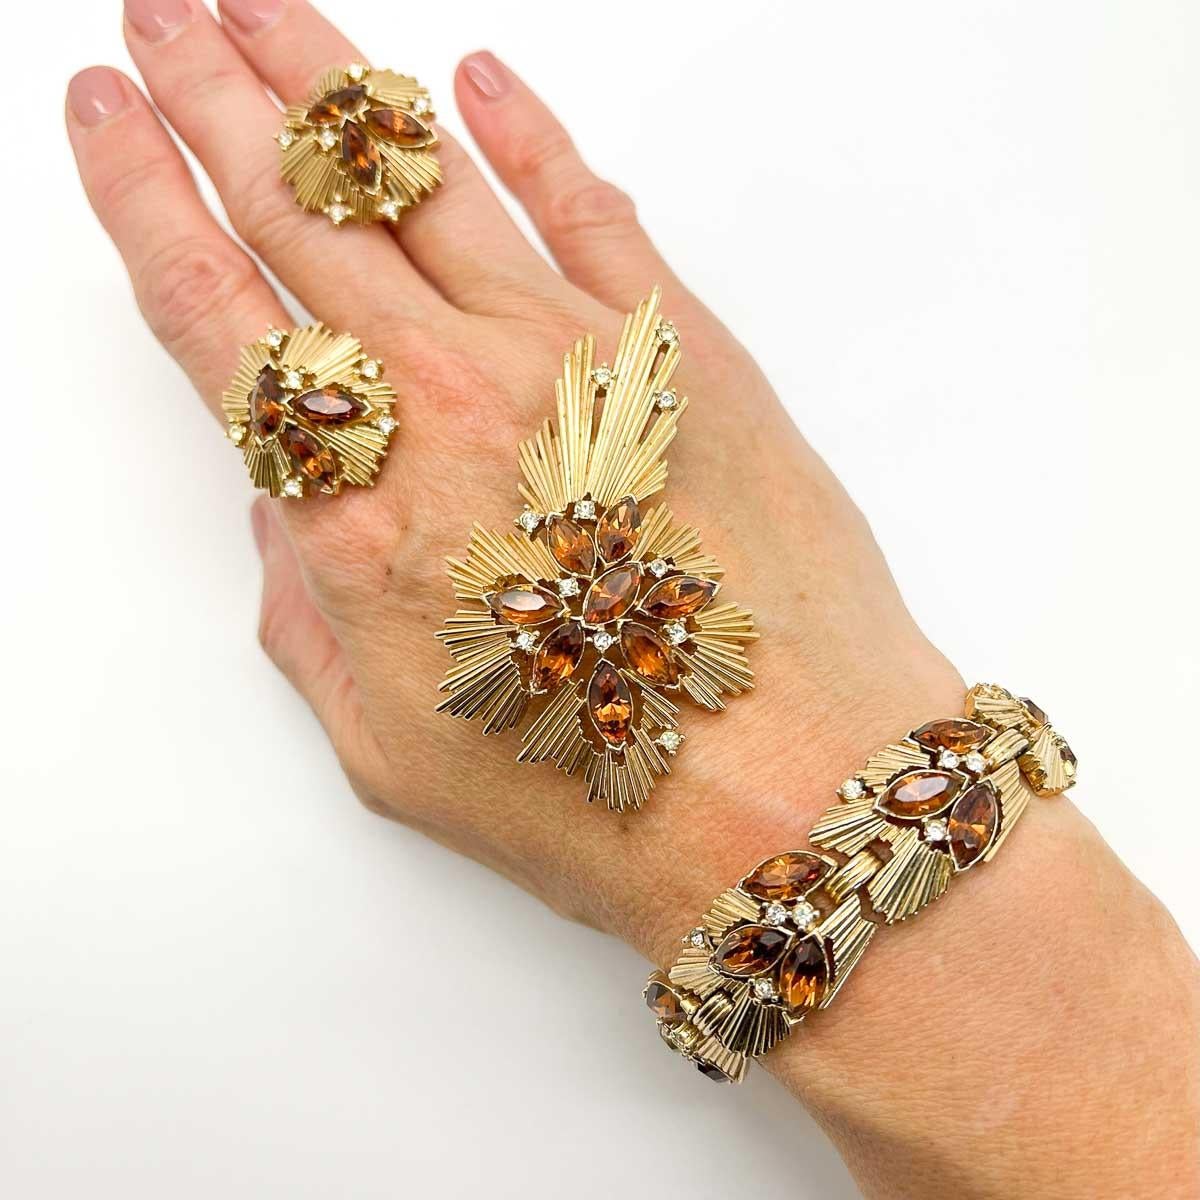 A rare and exquisite Vintage Trifari Modernist Topaz Parure. The modernist design now an iconic mid-century style that continues to transcend both fine and costume jewellery. An incredible find to have the complete suite. Worn individually or fully